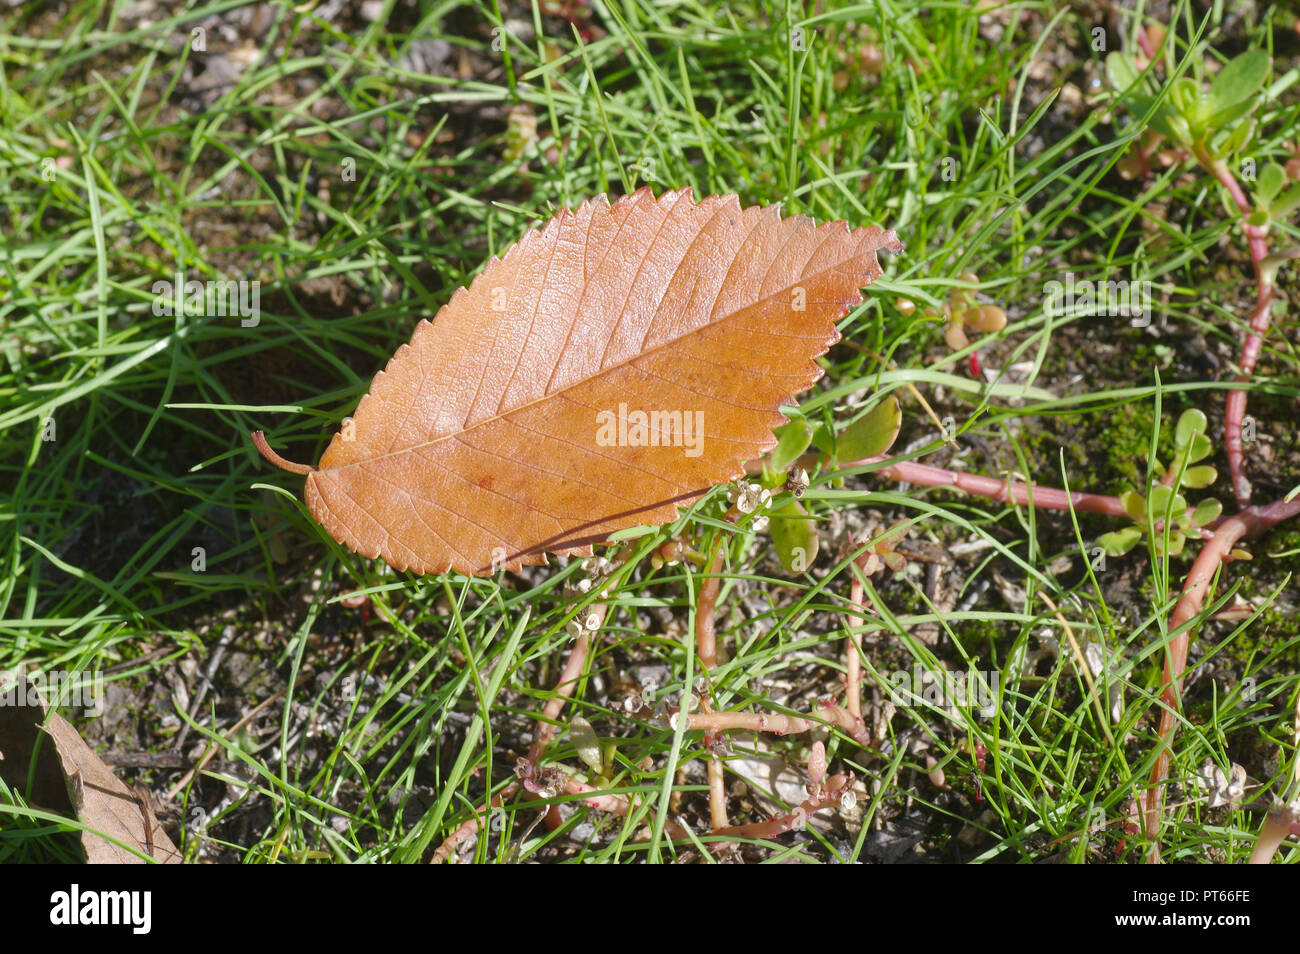 First dry leaf lying on green herbs at fall season Stock Photo